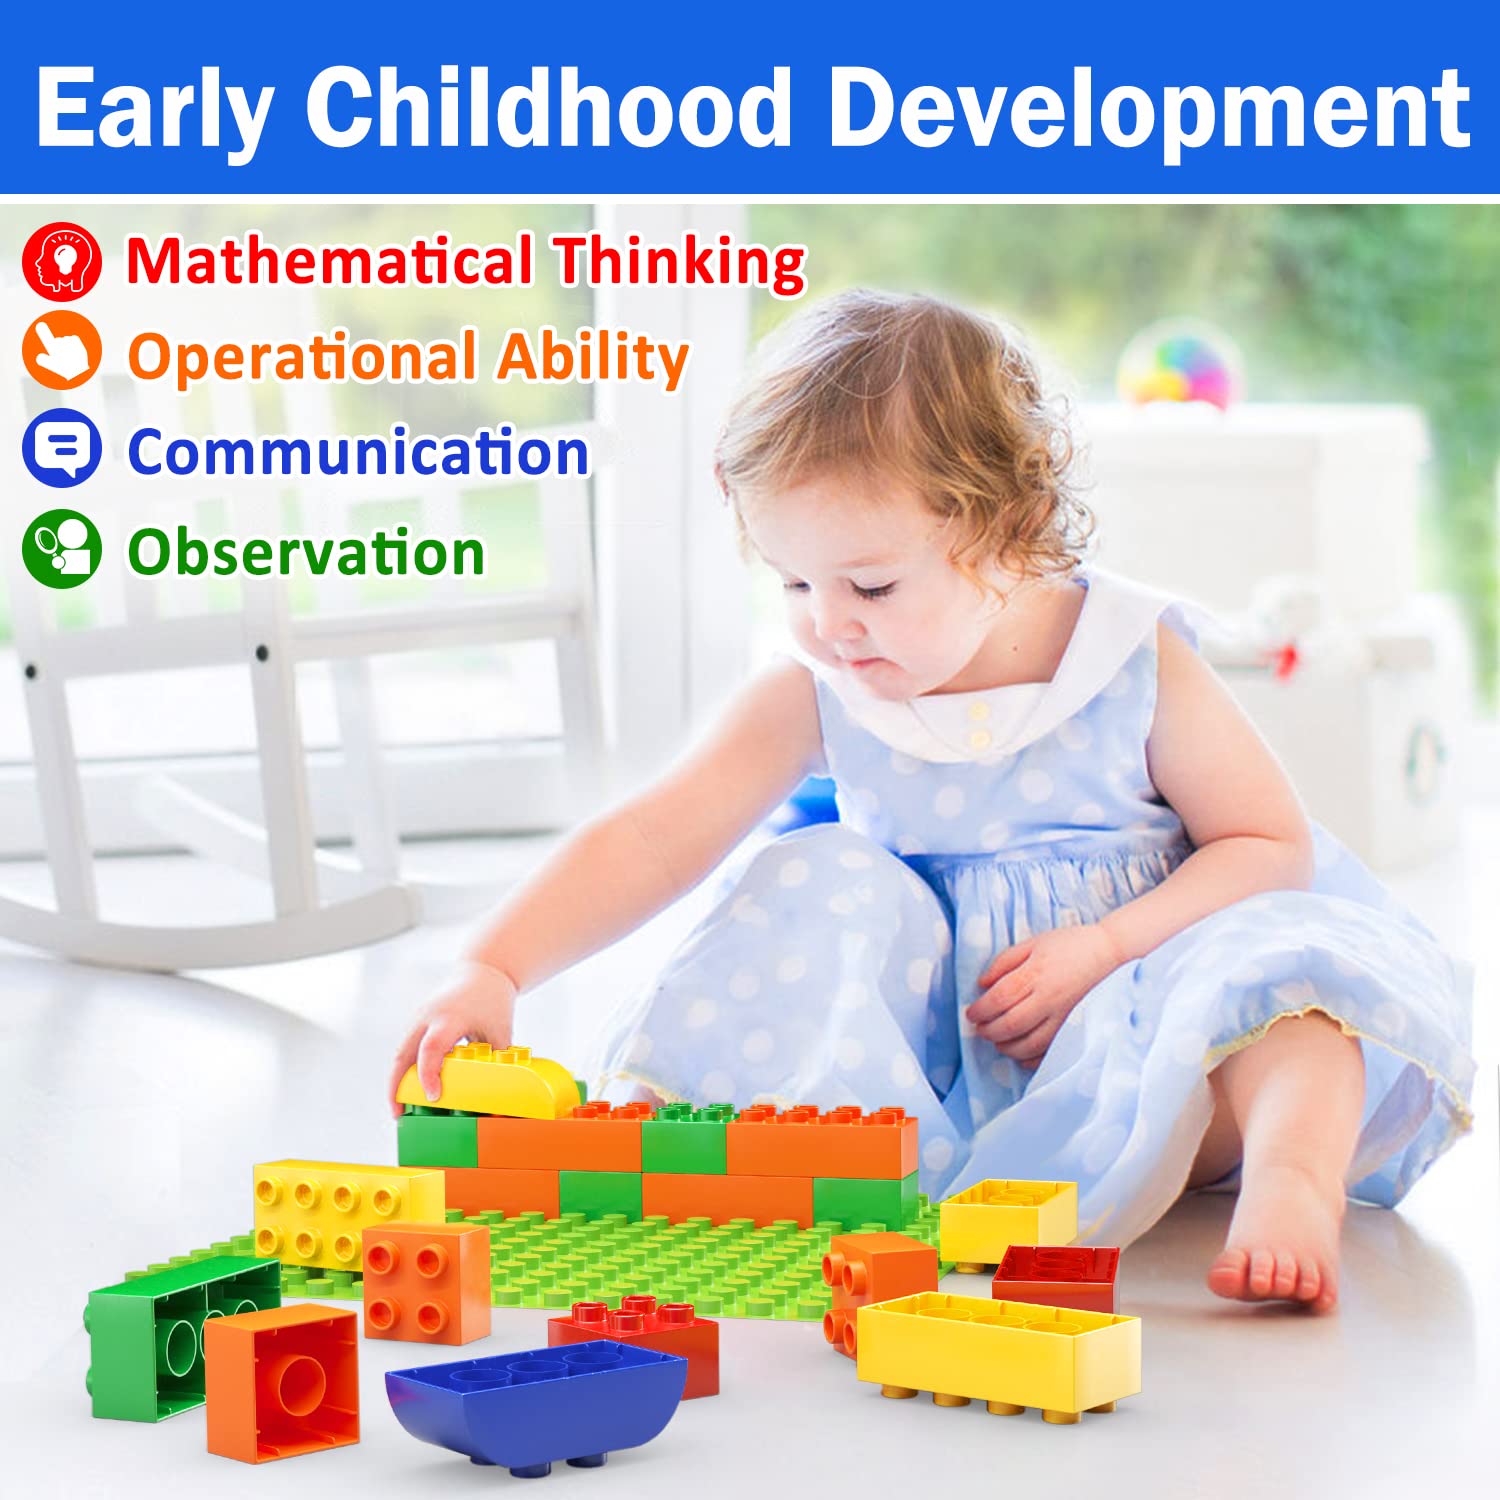 Building Blocks for Toddlers 2-5 Including a Baseplate, 150 Piece Big Building Blocks for Kids, Block and Bricks Set Educational Toys for Children Boys Girls All Ages, Compatible with All Major Brands